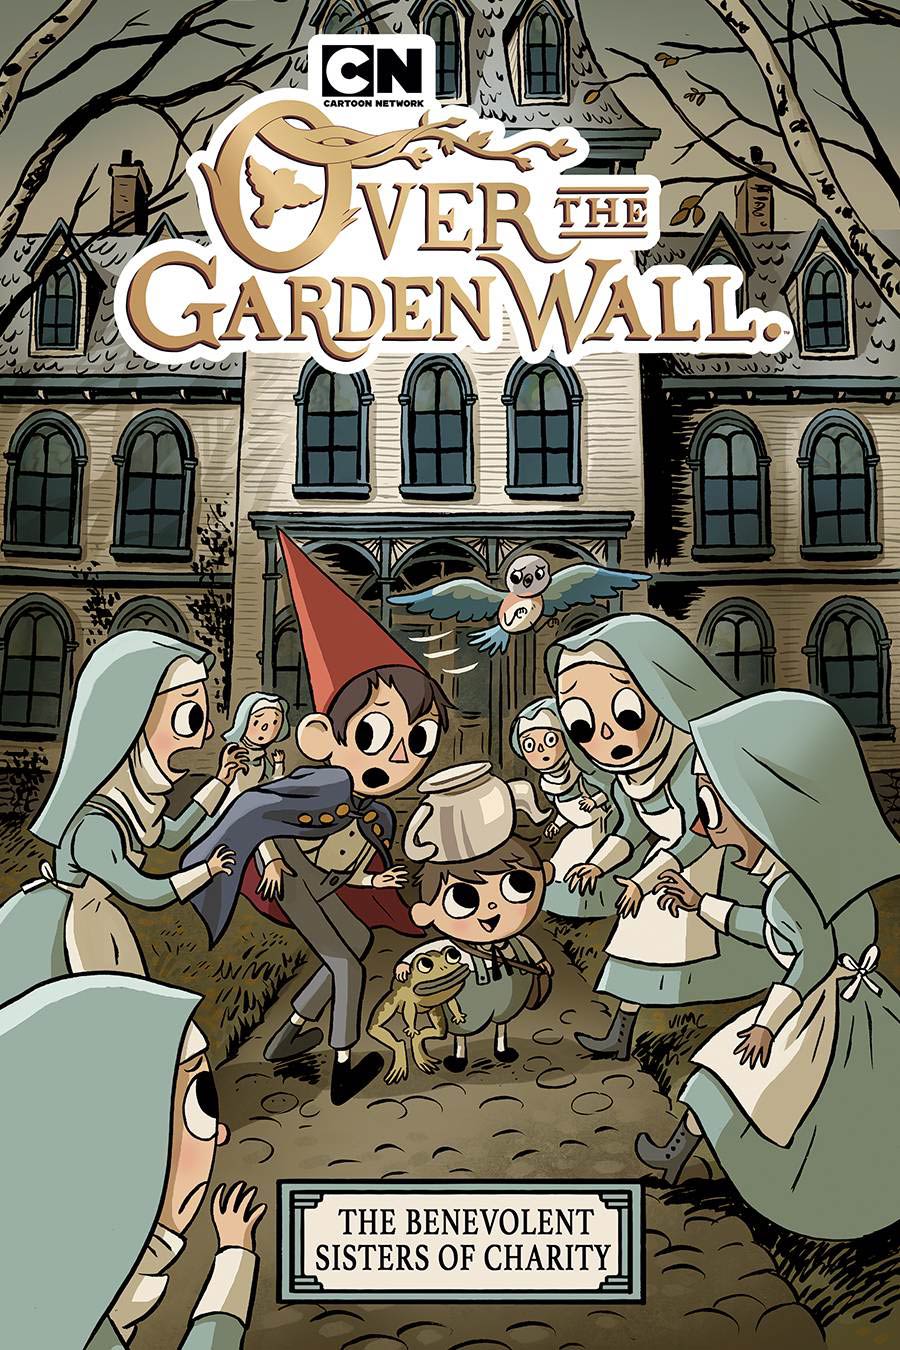 Over The Garden Wall Original Graphic Novel Vol 3 Benevolent Sisters Of Charity TP